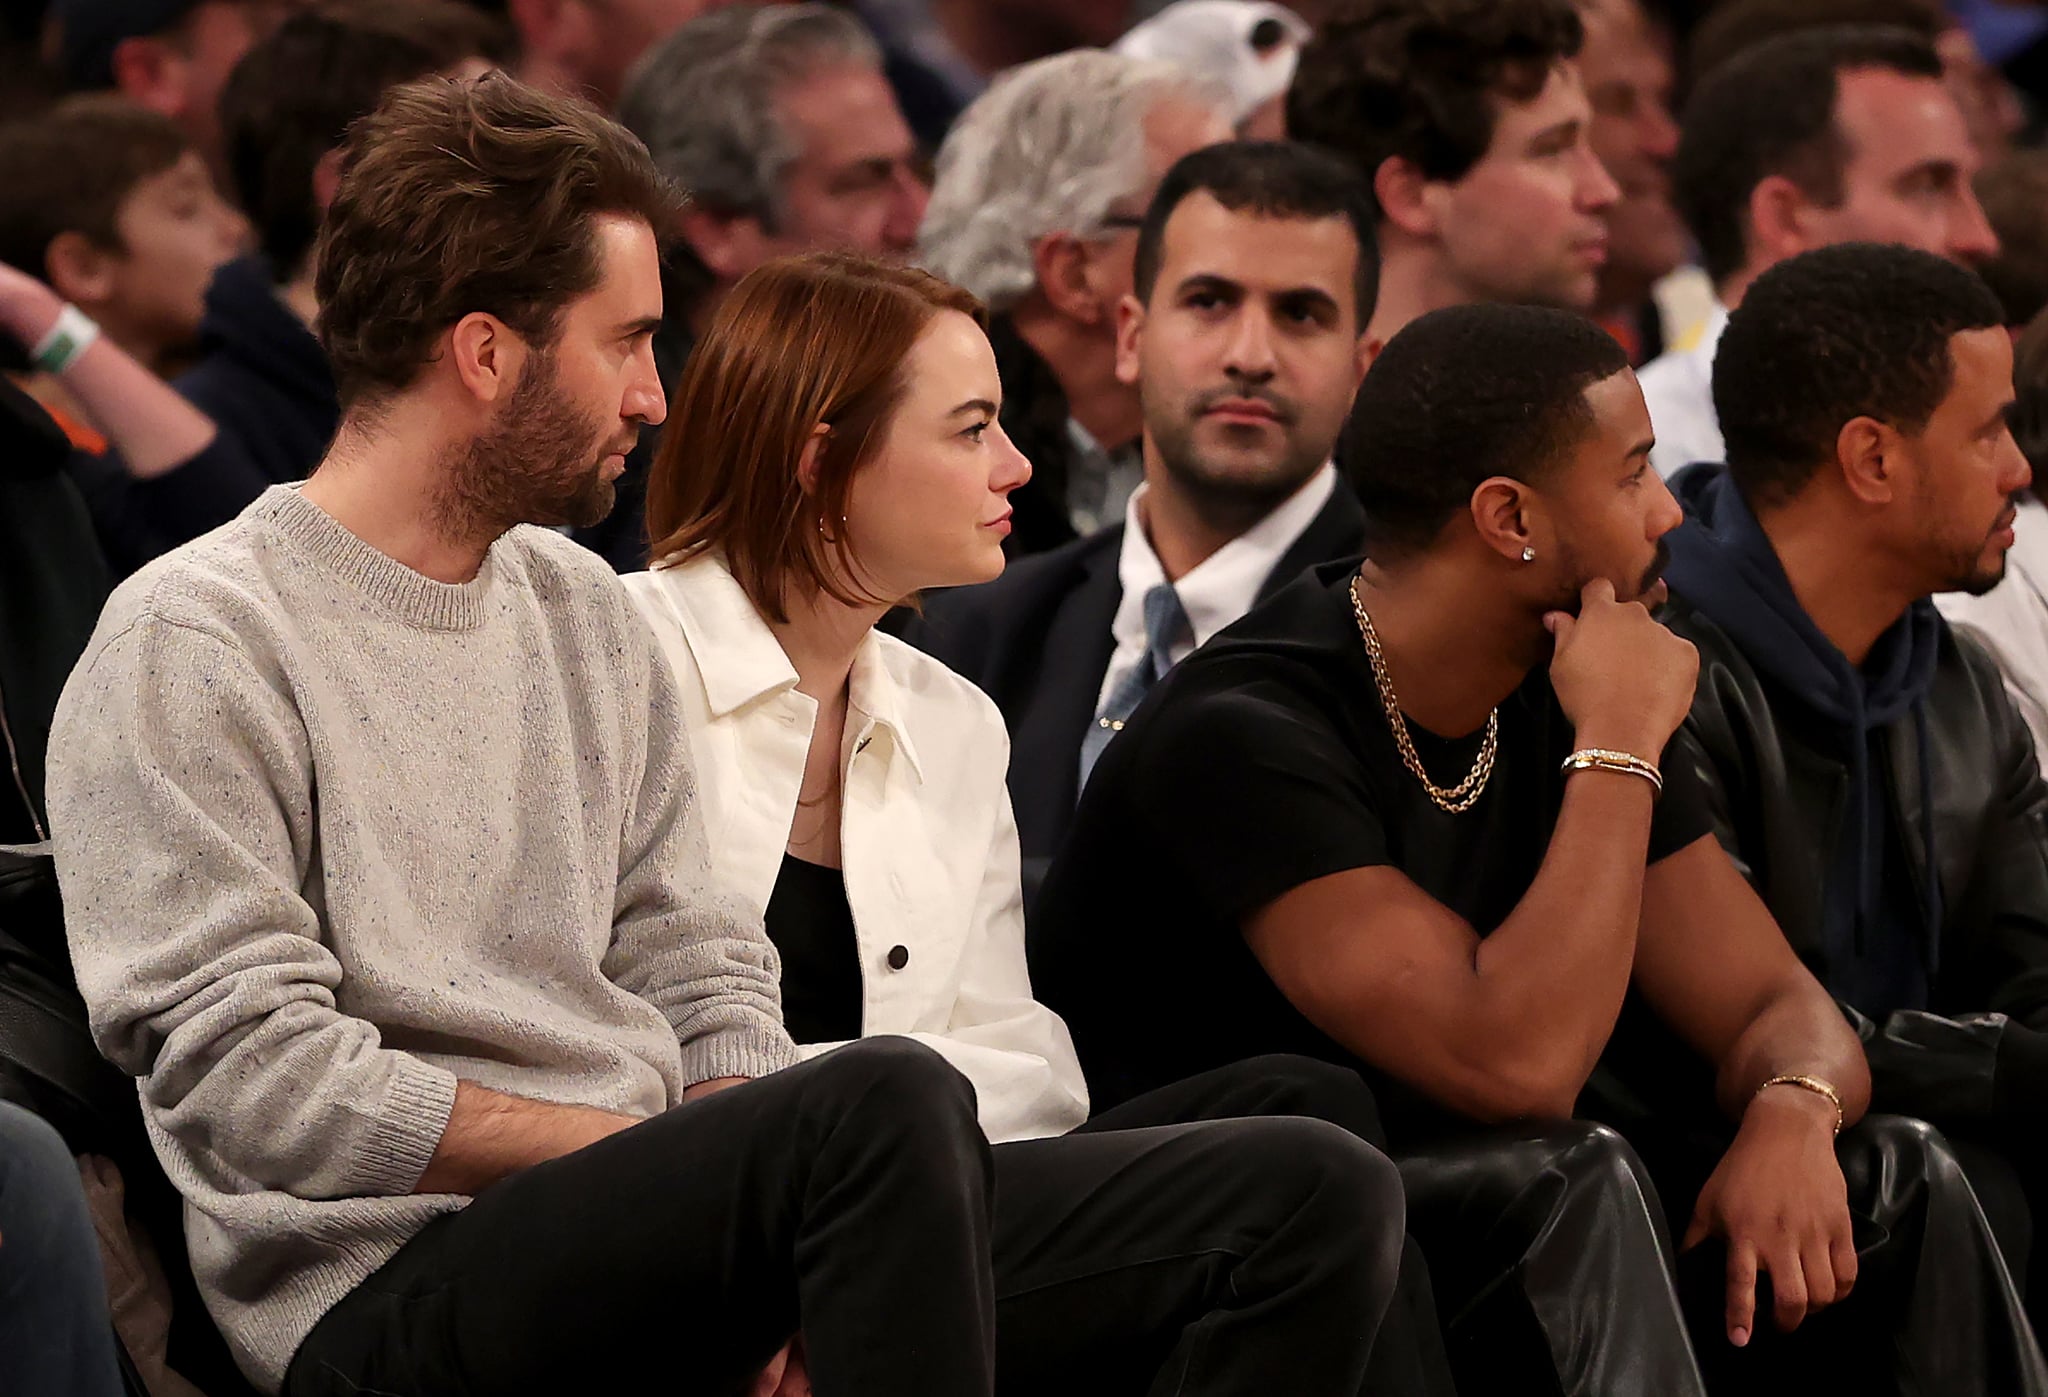 NEW YORK, NEW YORK - JANUARY 31: Dave McCary, Emma Stone and Michael B. Jordan attend the game between the New York Knicks and the Los Angeles Lakers at Madison Square Garden on January 31, 2023 in New York City. The Los Angeles Lakers defeated the New York Knicks 129-123 in overtime. NOTE TO USER: User expressly acknowledges and agrees that, by downloading and or using this photograph, User is consenting to the terms and conditions of the Getty Images License Agreement. (Photo by Elsa/Getty Images)